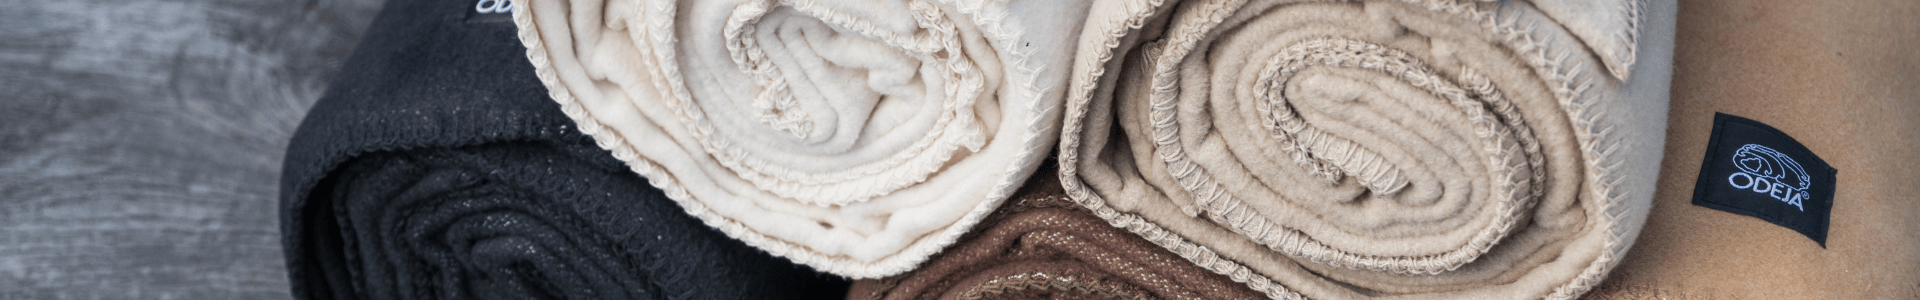 Woven cotton blankets